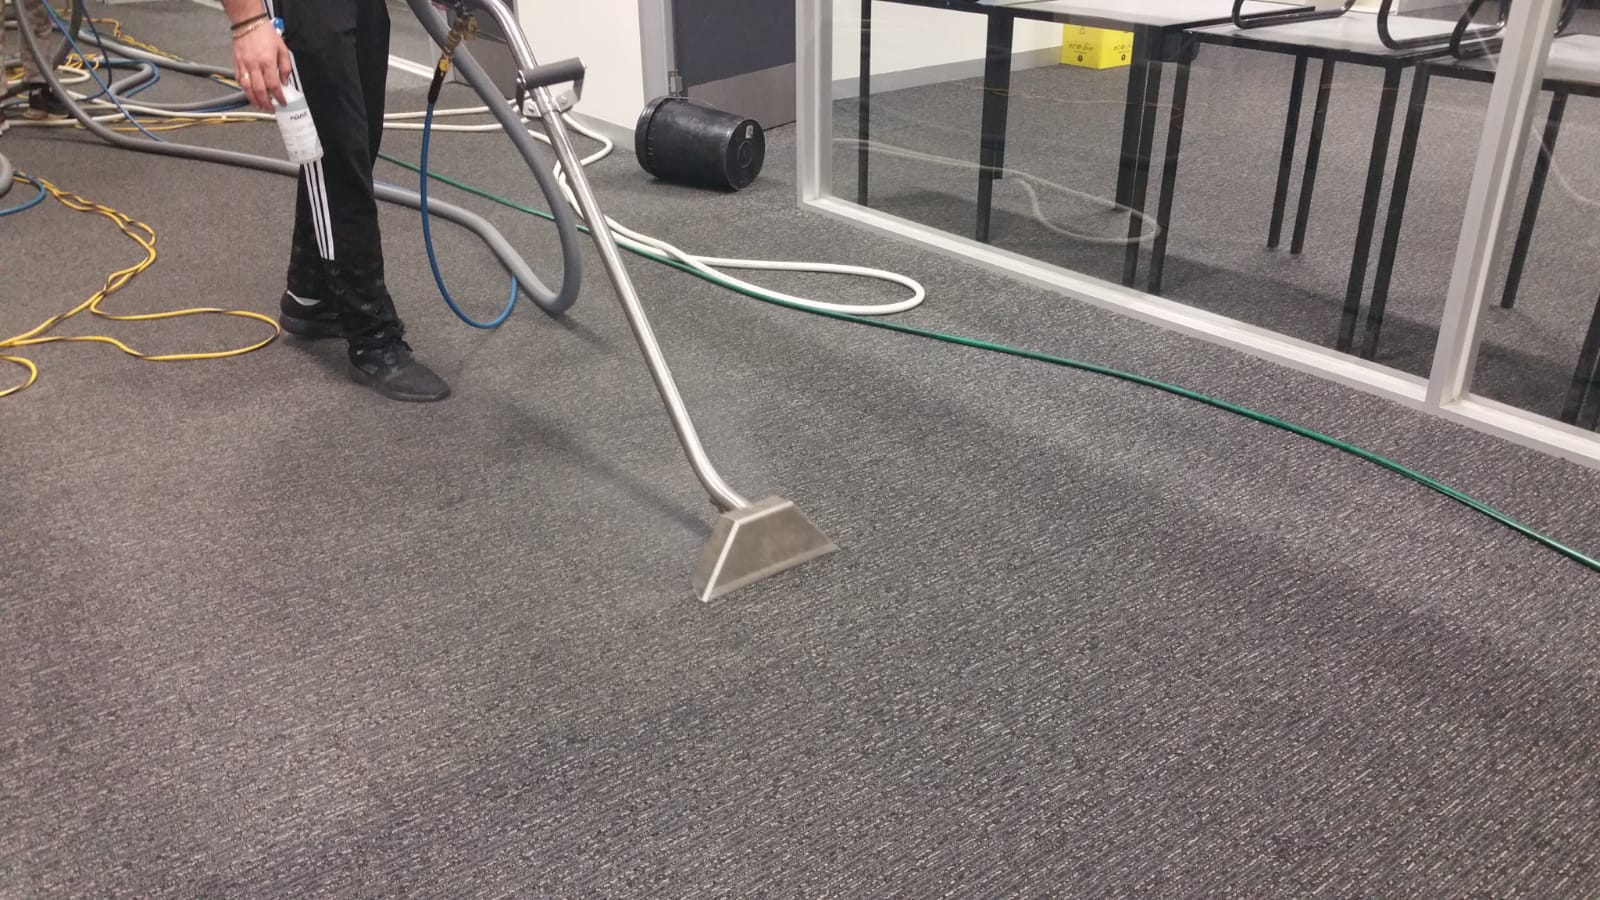 Classroom Carpet Steam Cleaning